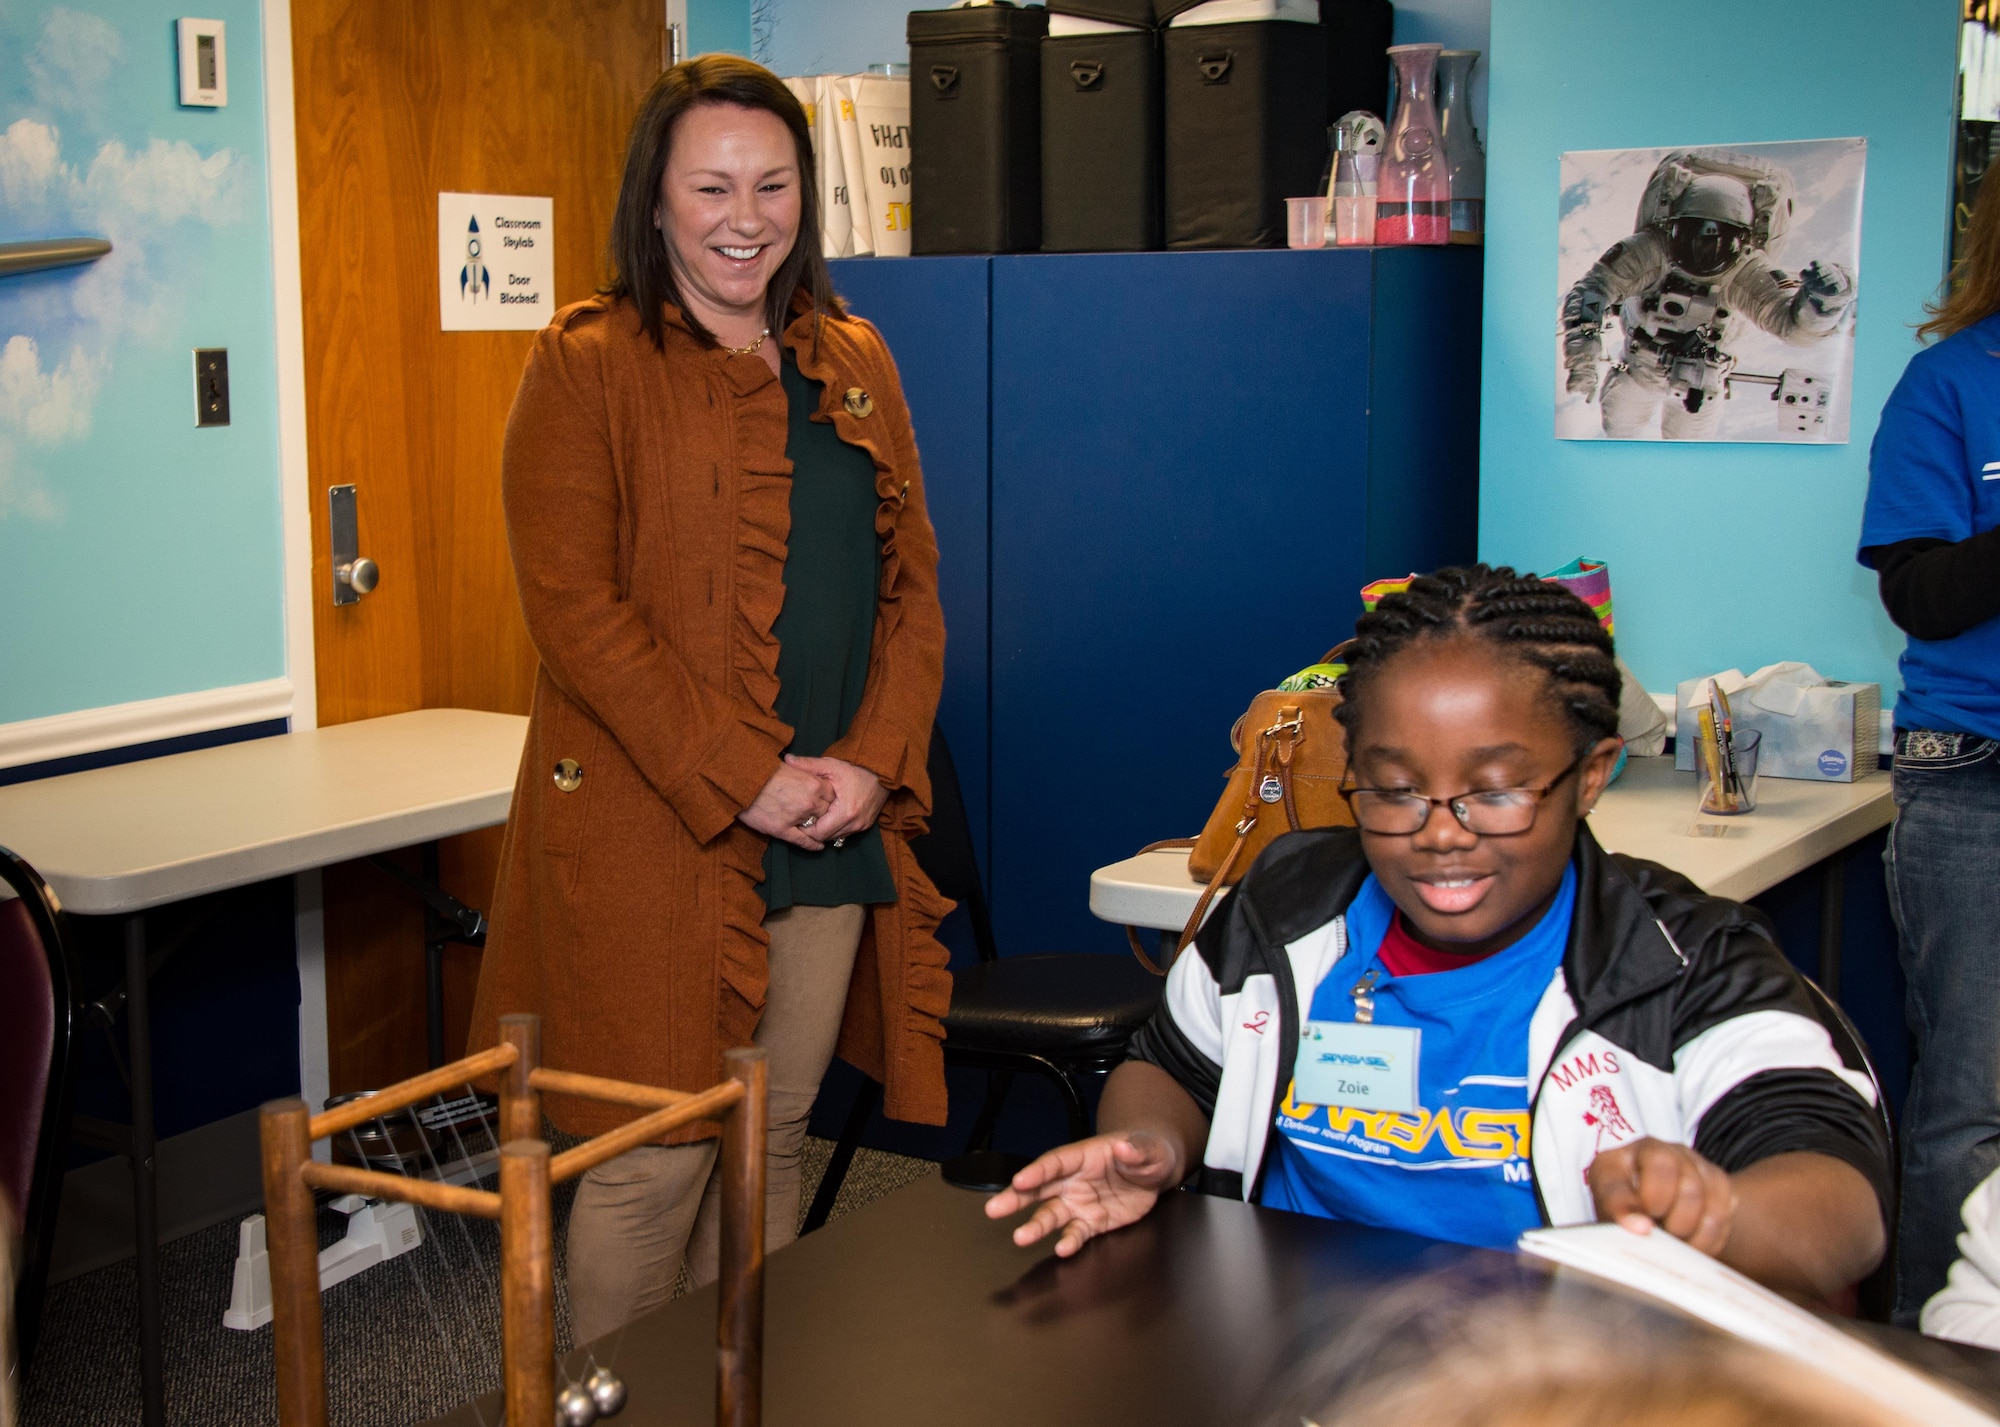 Congresswoman Martha Roby, U.S. Representative for Alabama’s Second Congressional District, looks on as a child works on science lessons regarding equal and opposite force during her first visit to STARBASE Maxwell, Nov. 27, 2017, Maxwell Air Force Base, Ala. STARBASE is a Department of Defense educational awareness and outreach program focused on providing Science, Technology, Engineering and Math lessons to fifth graders. During her visit, Roby toured the facility and experience everything the program offers to the local students. (U.S. Air Force photo by Melanie Rodgers Cox/Released.)